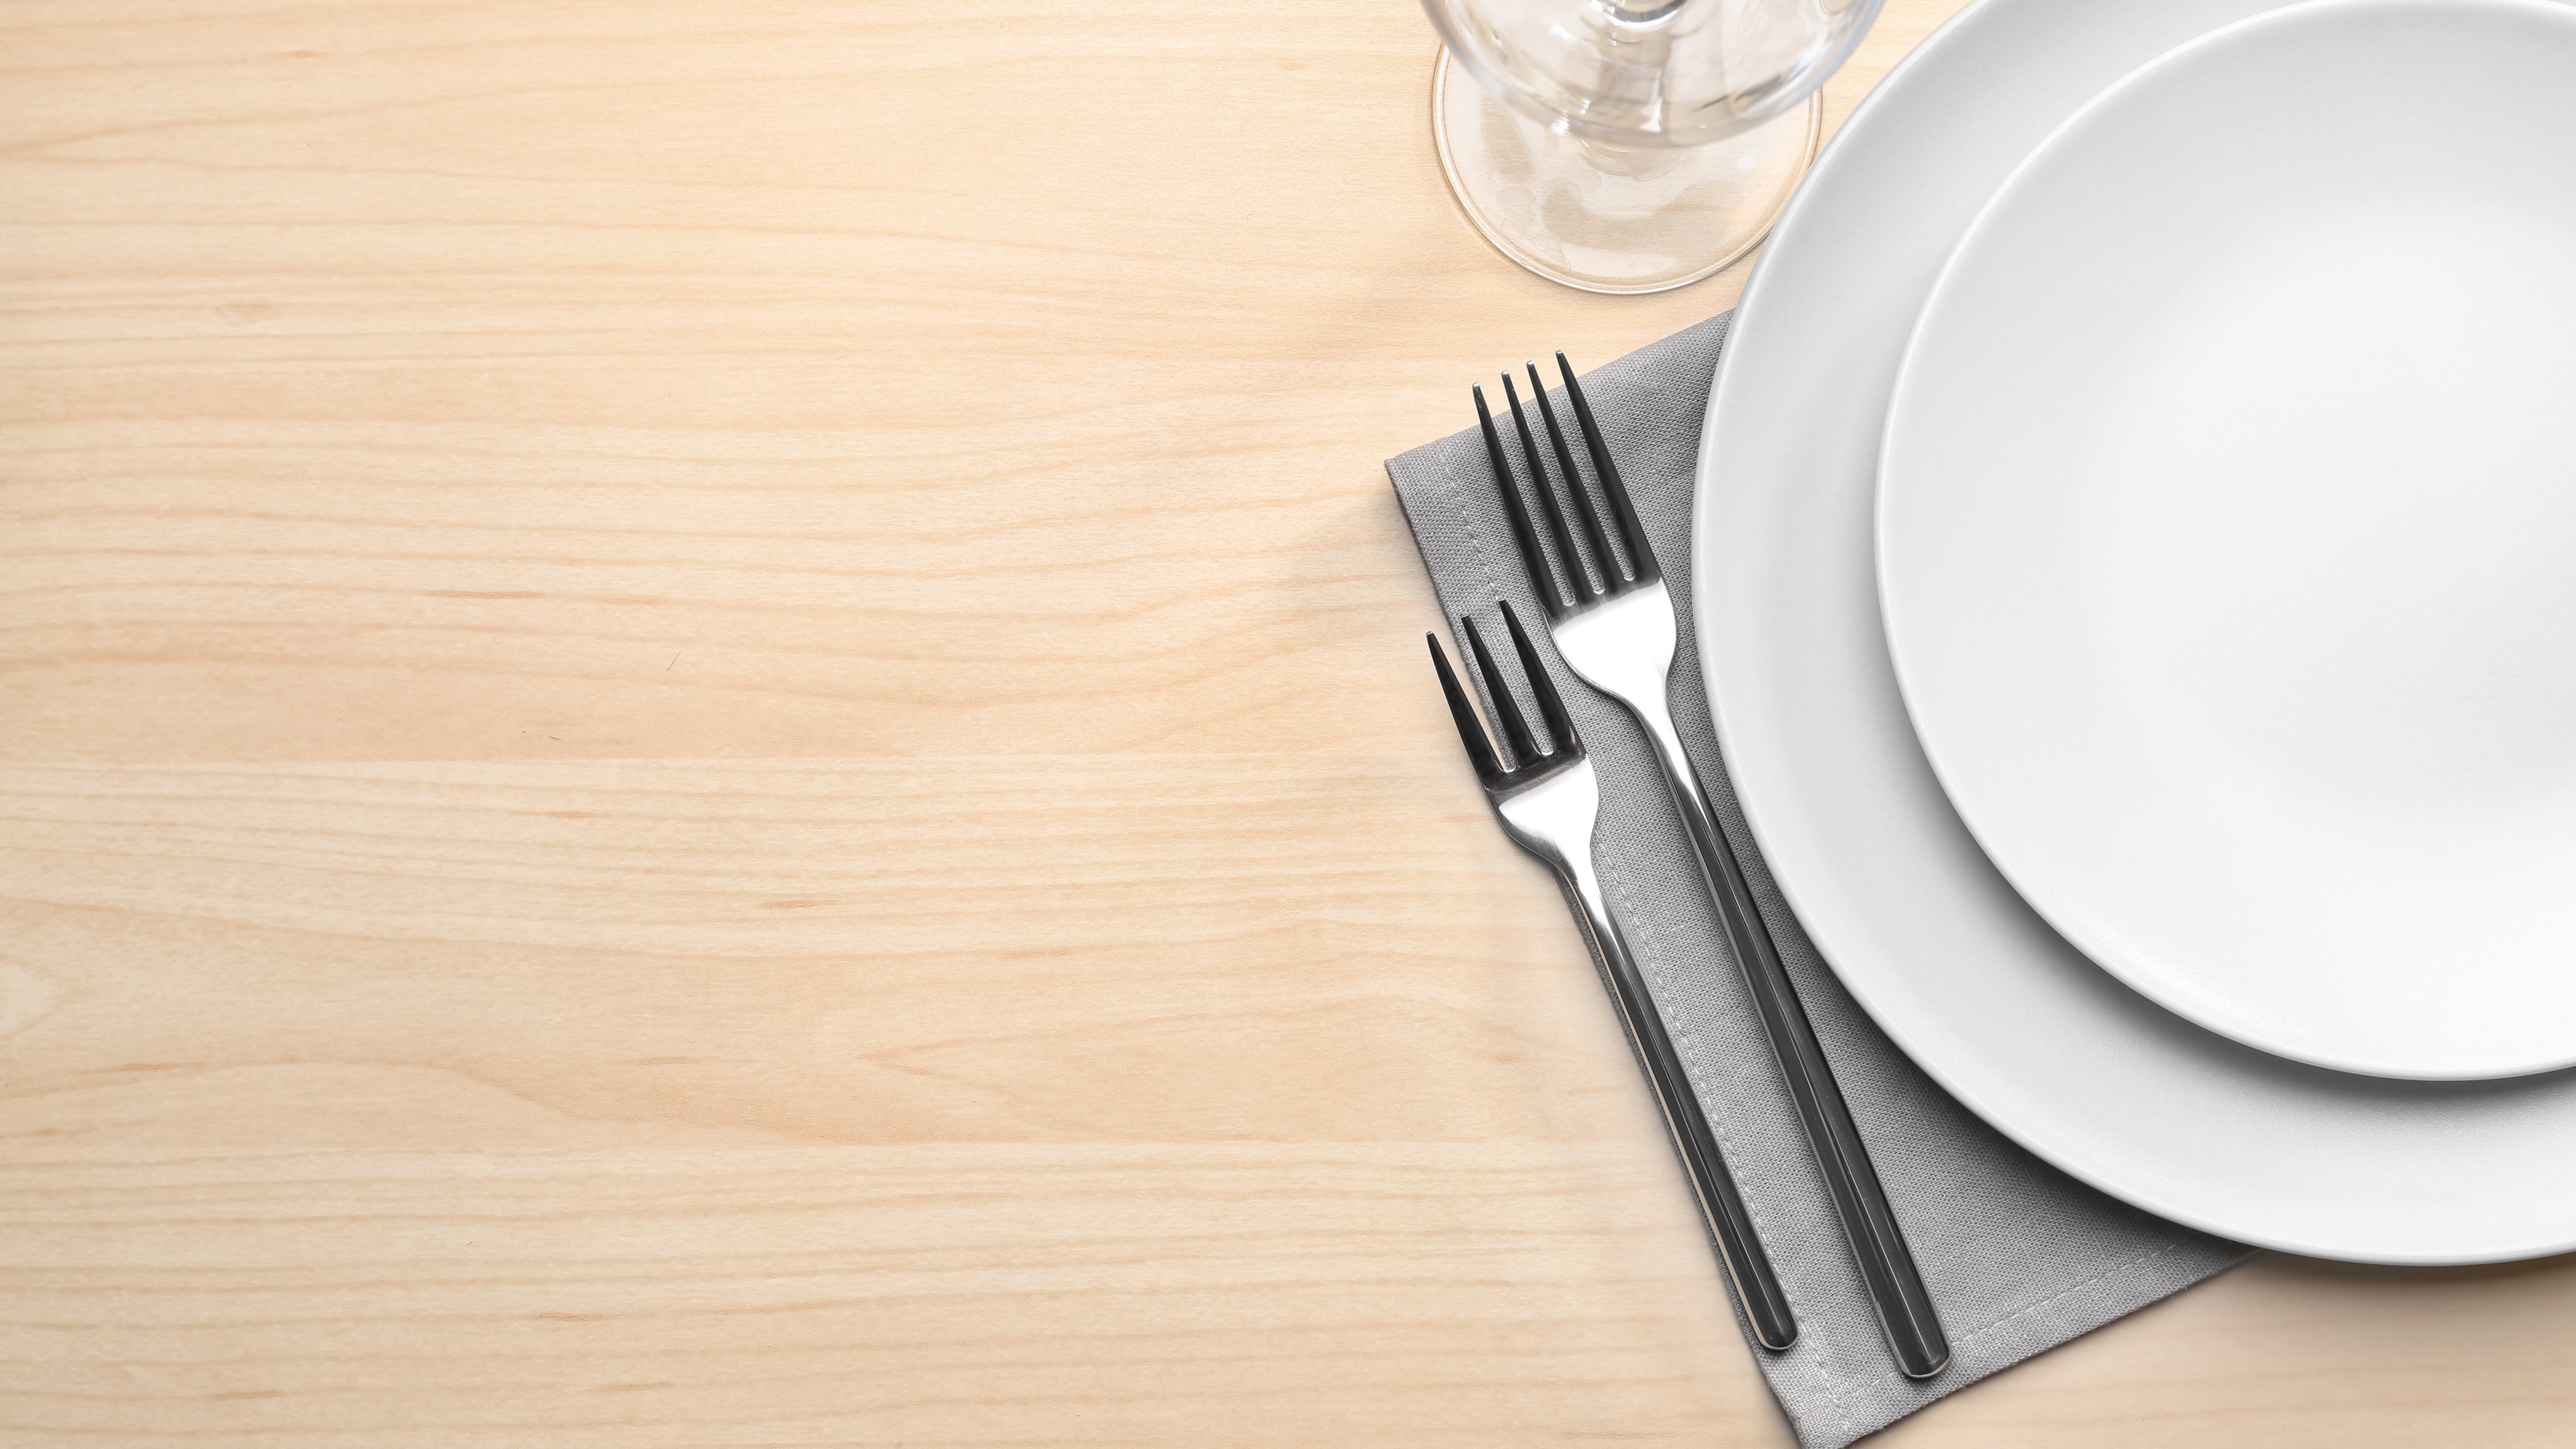 How To Share A Meal When You’re Physically Distancing